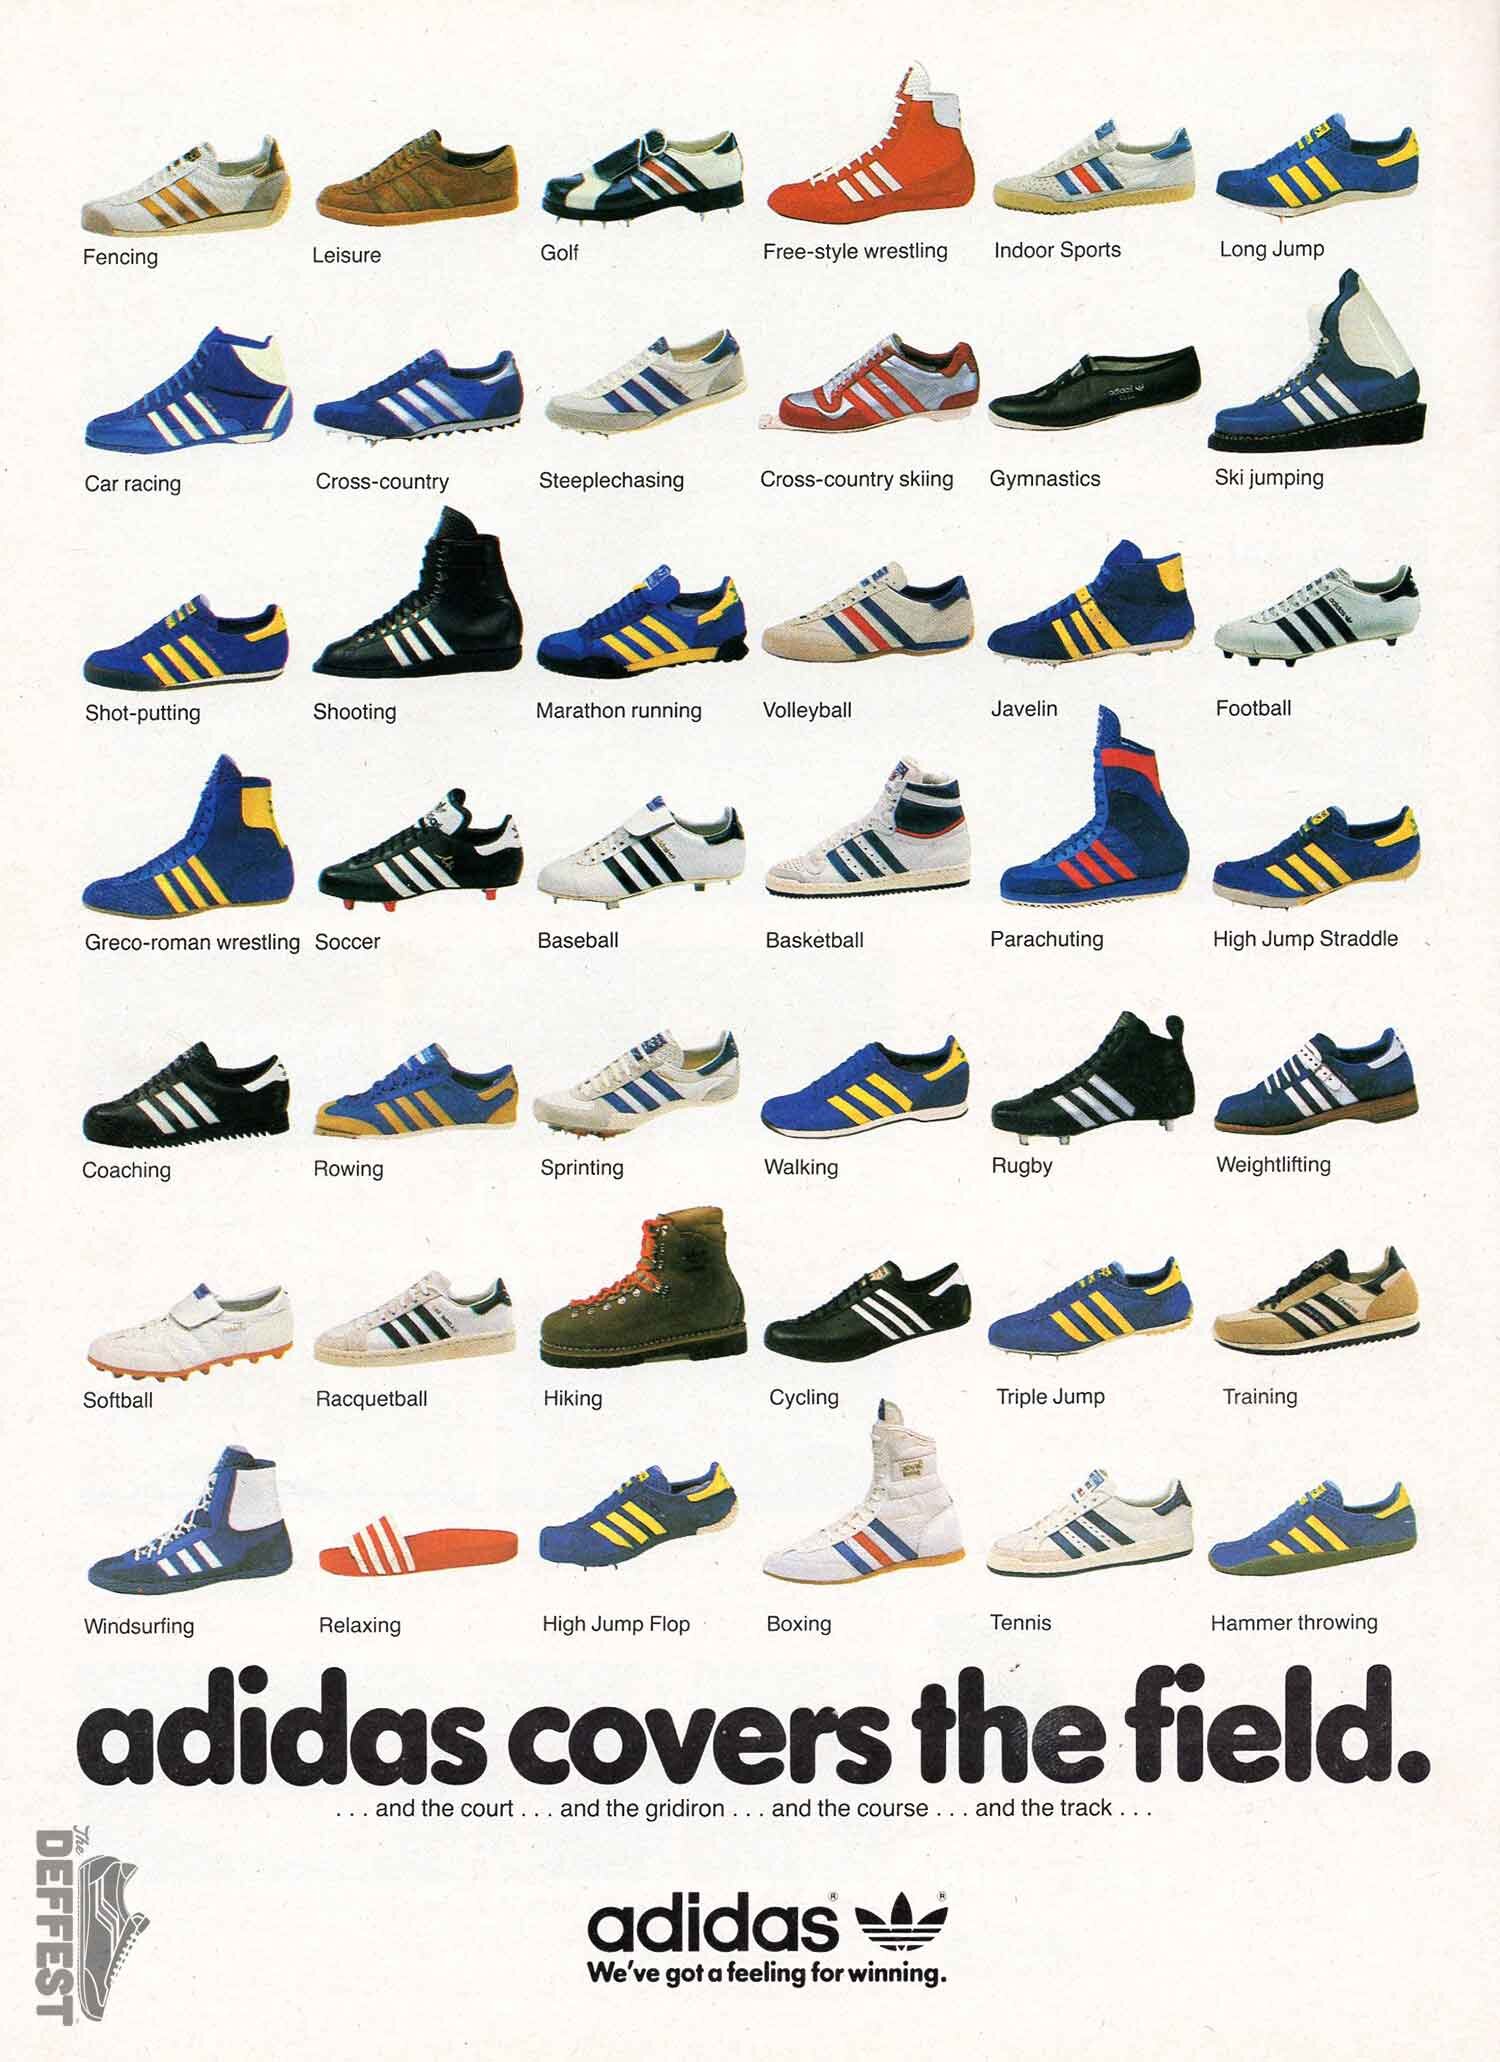 vintage adidas sneakers — The Deffest®. A vintage and retro sneaker